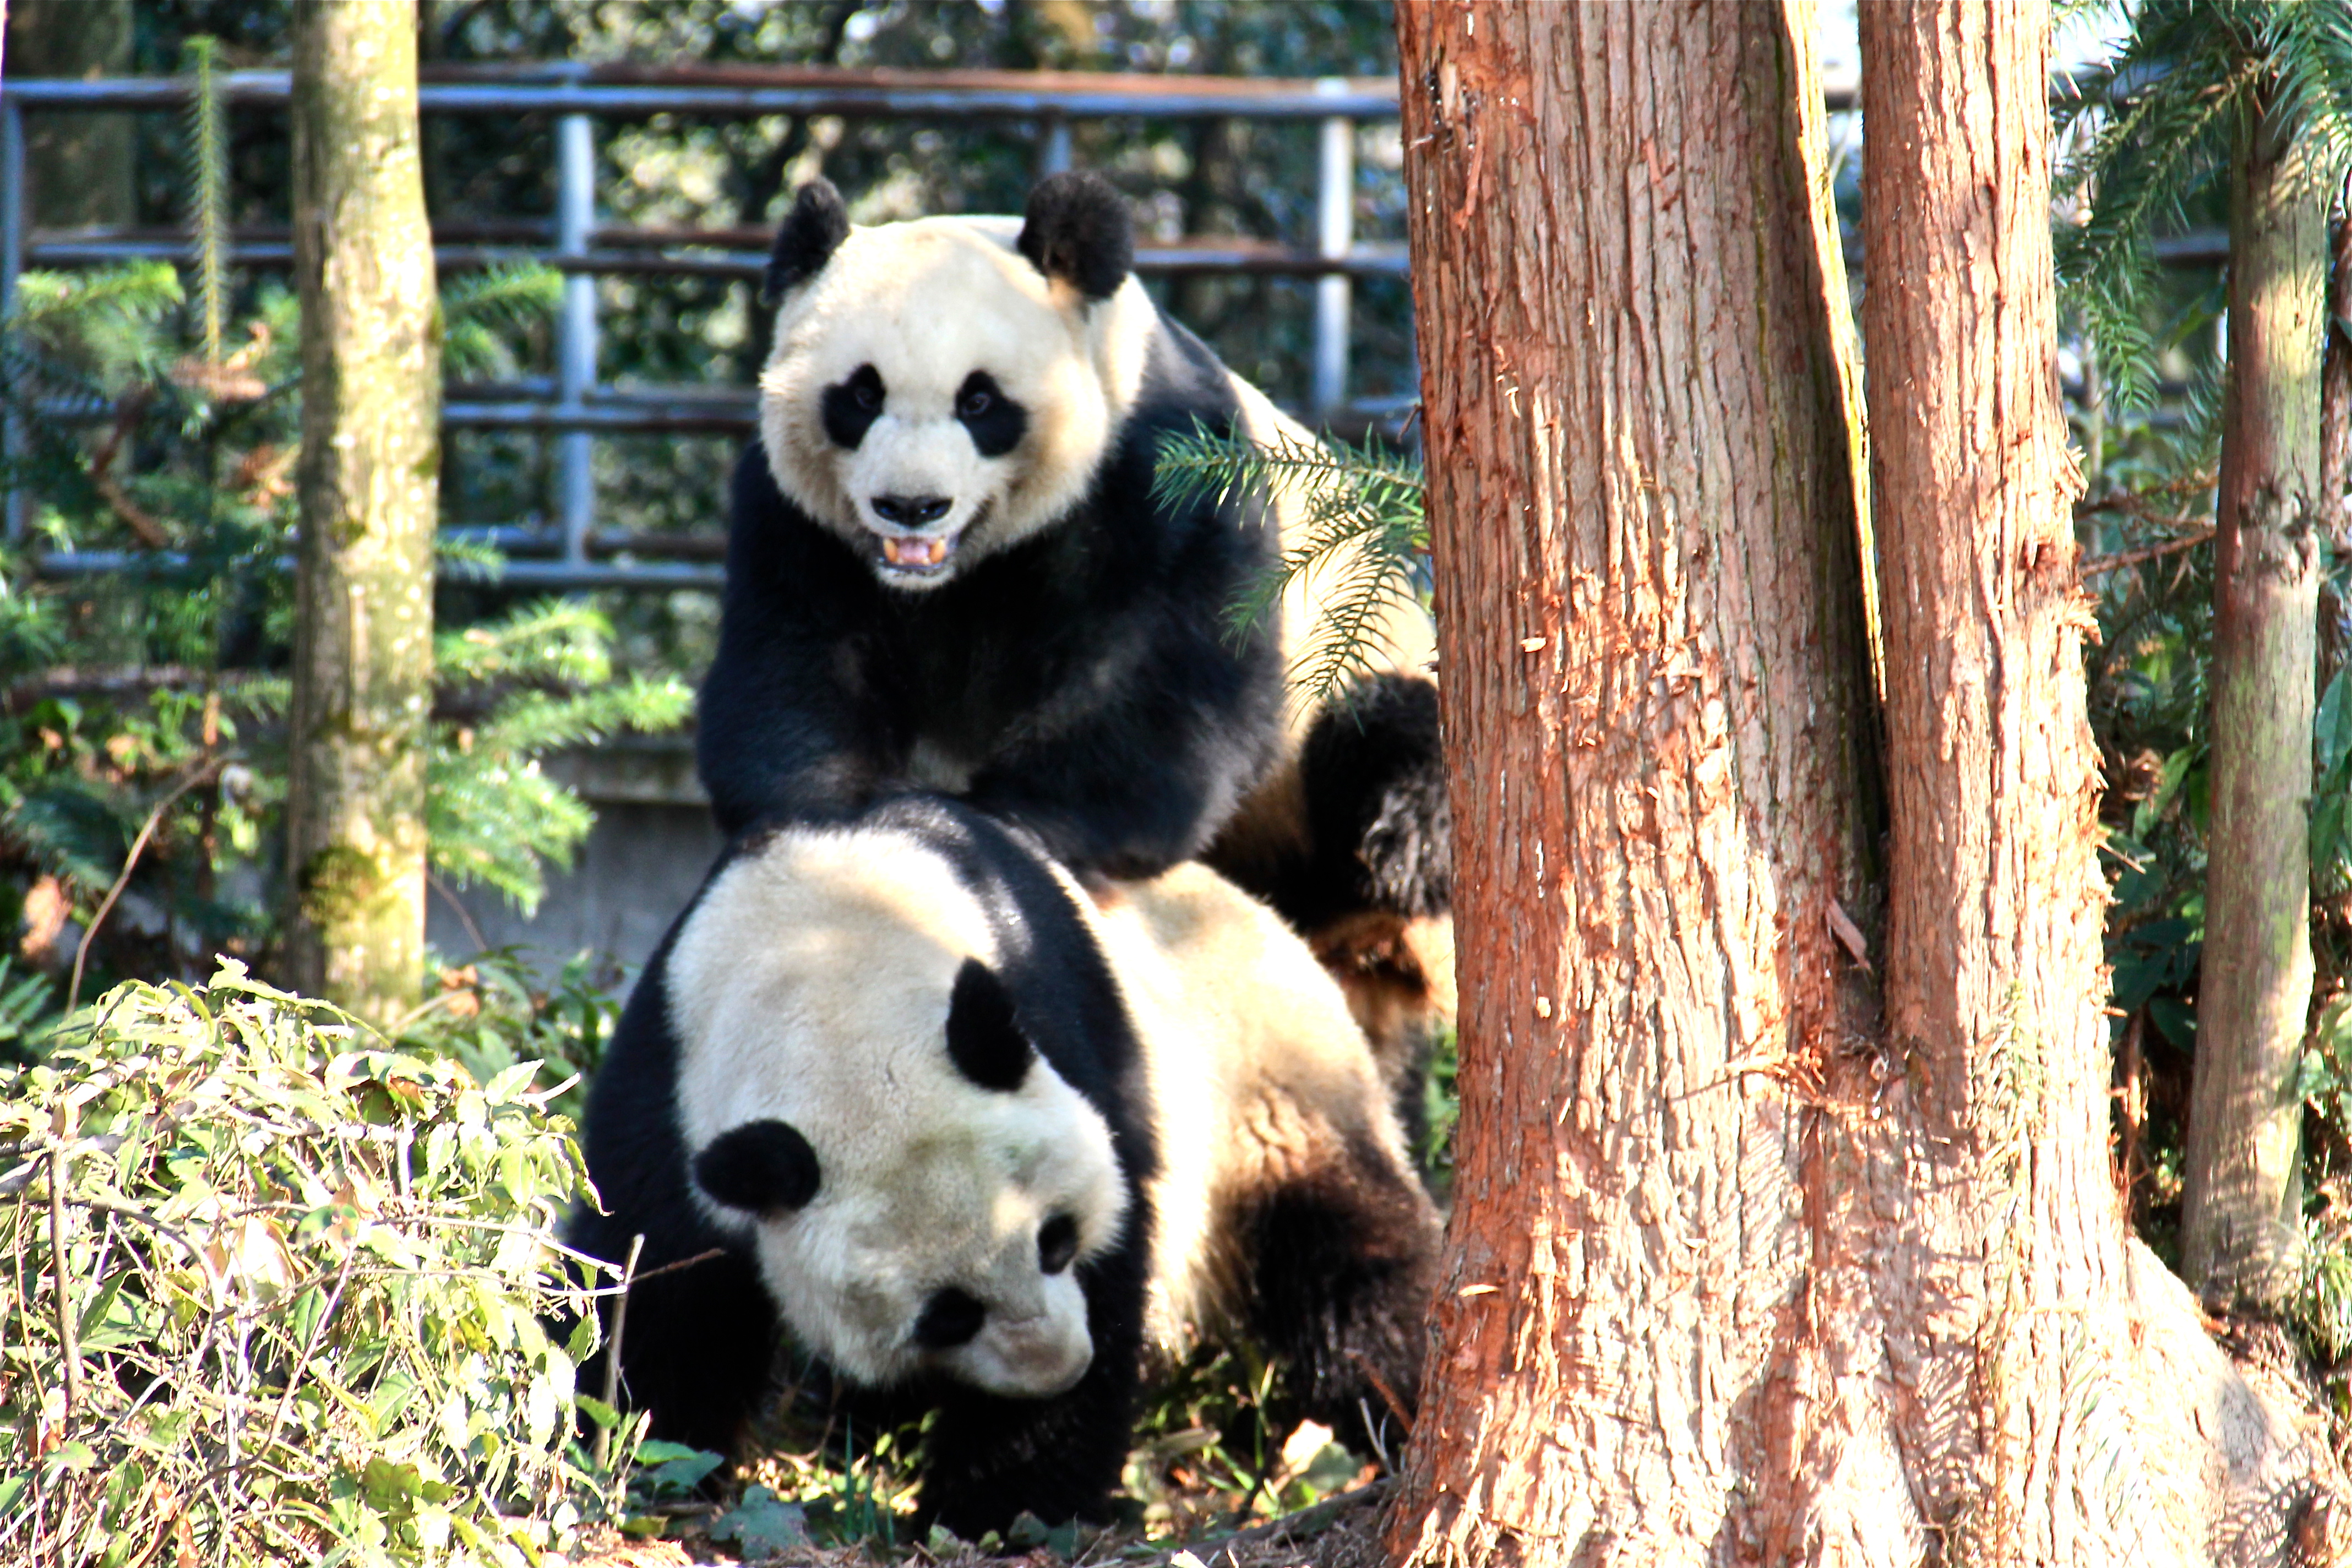 Mate choice is the key to successful giant panda breeding